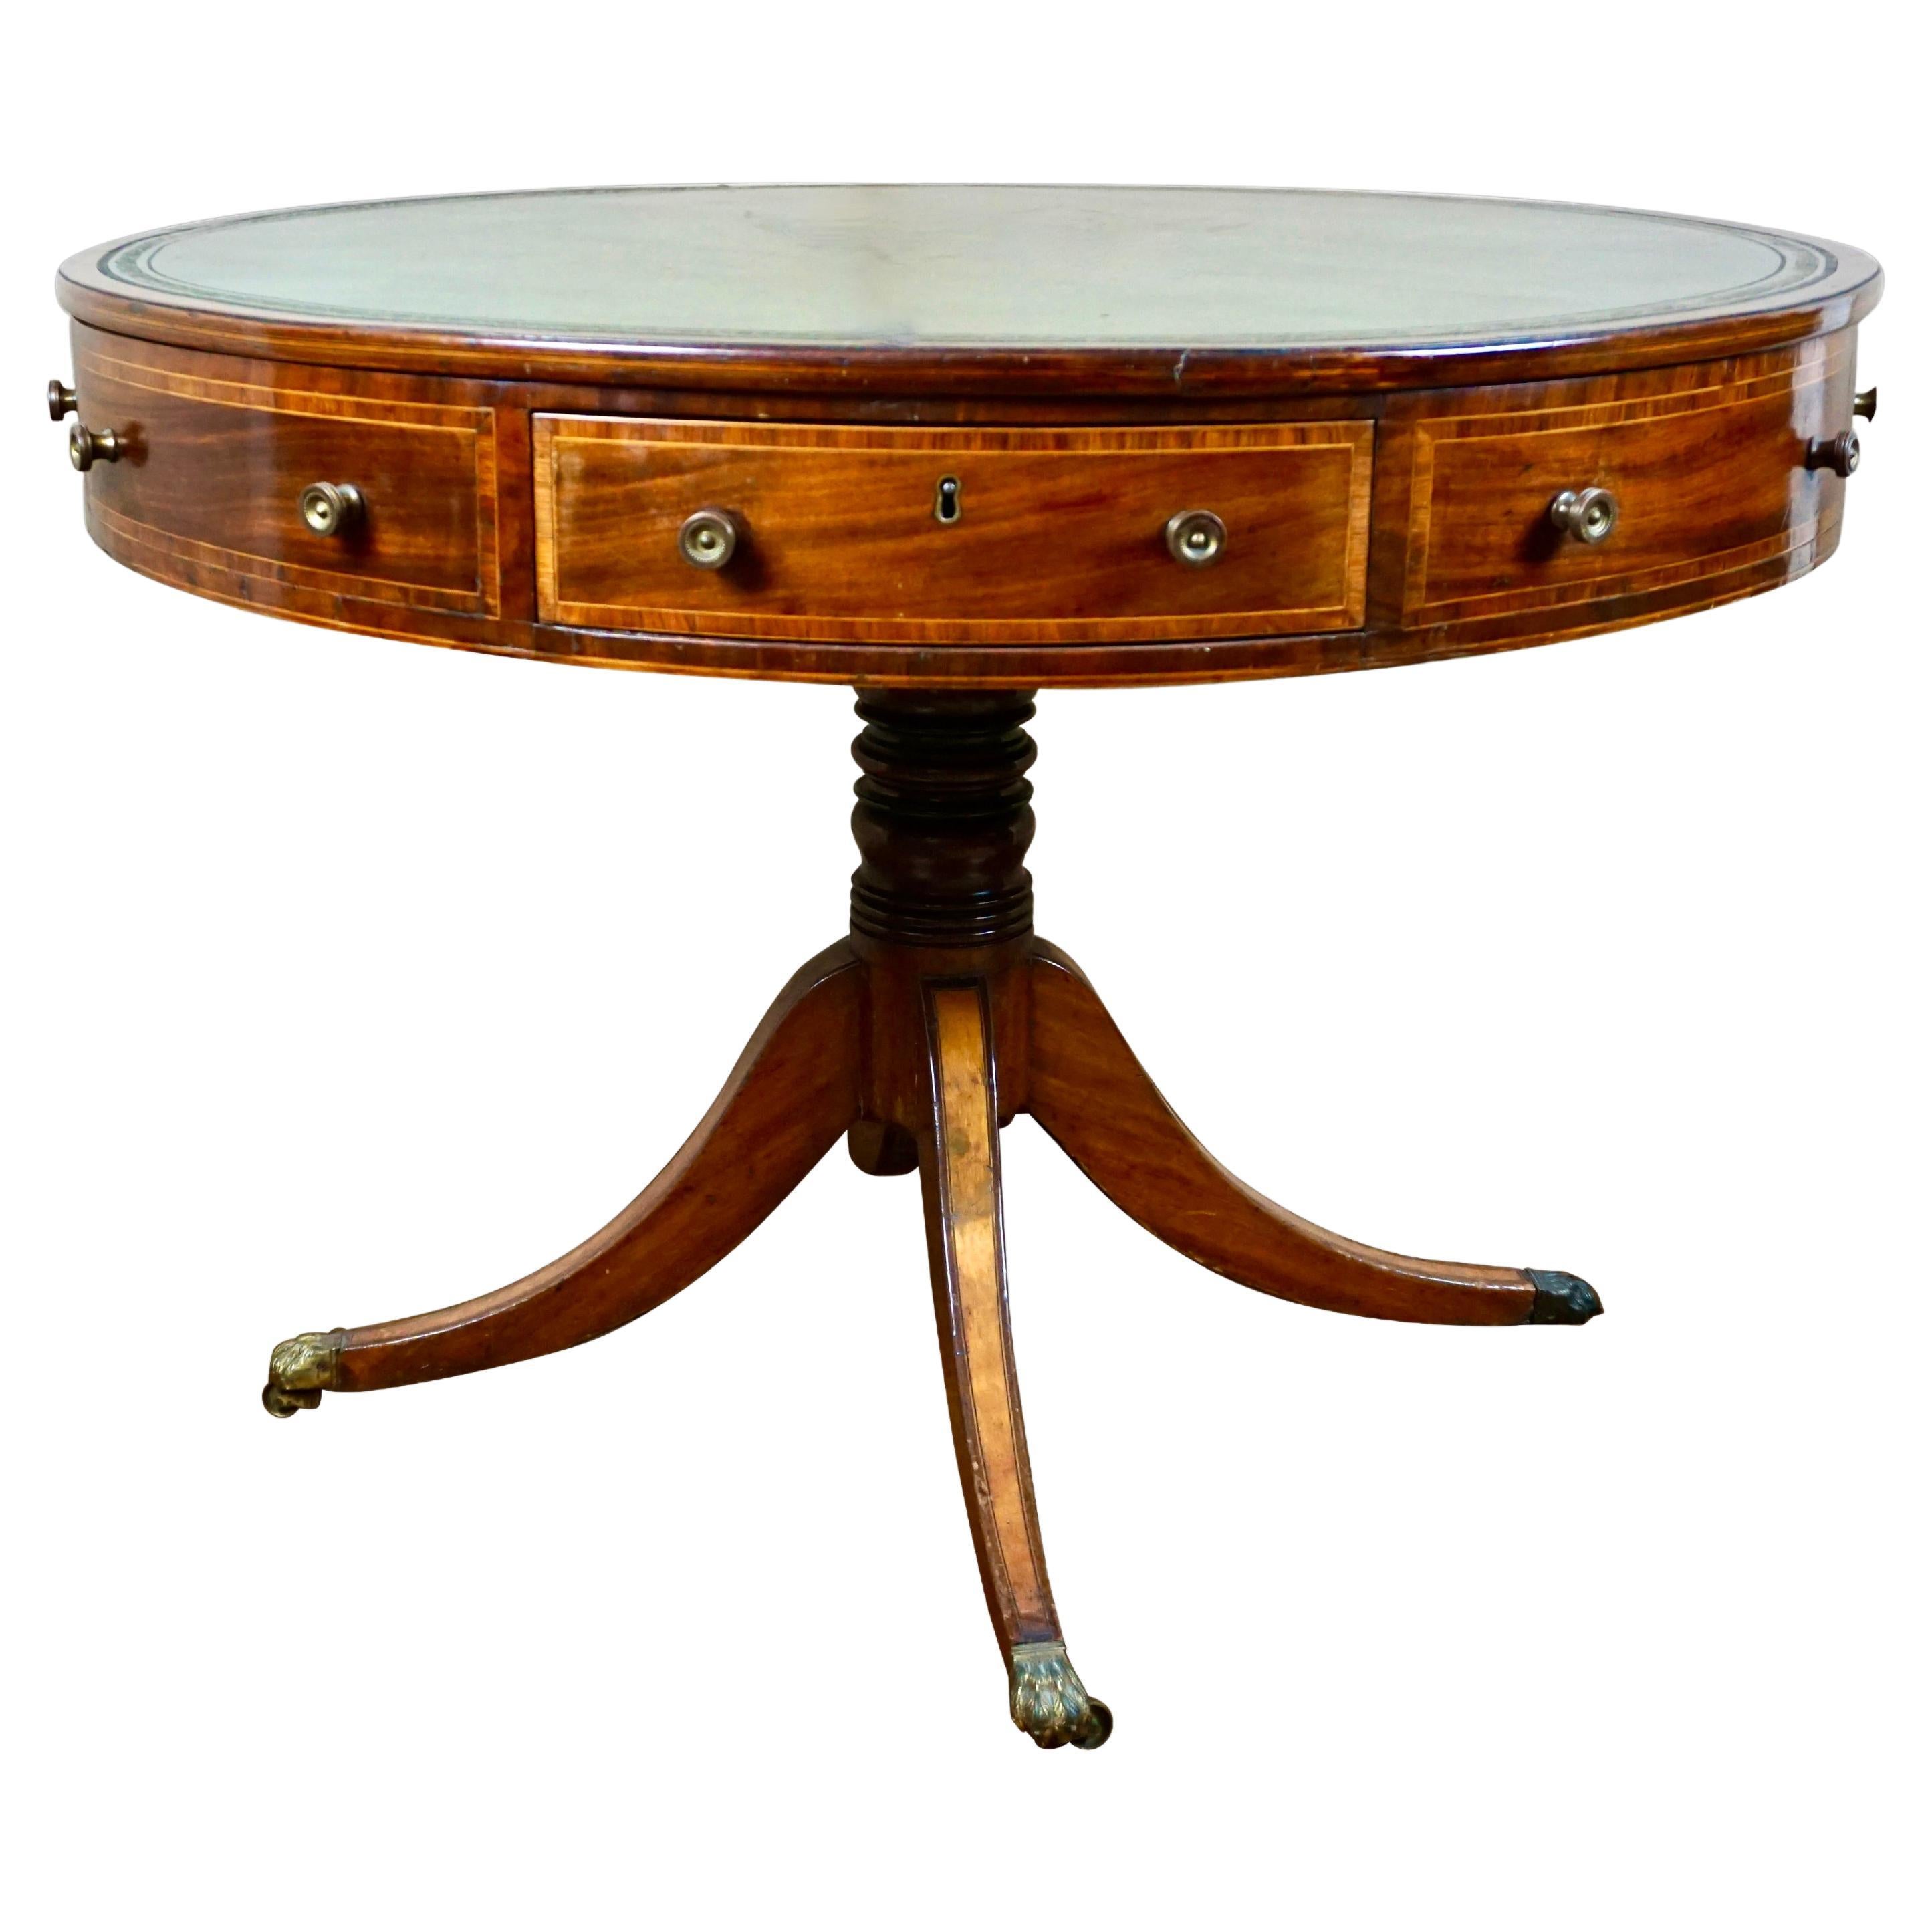 English Late Regency Inlaid Mahogany Drum Table with Green Tooled Leather Top